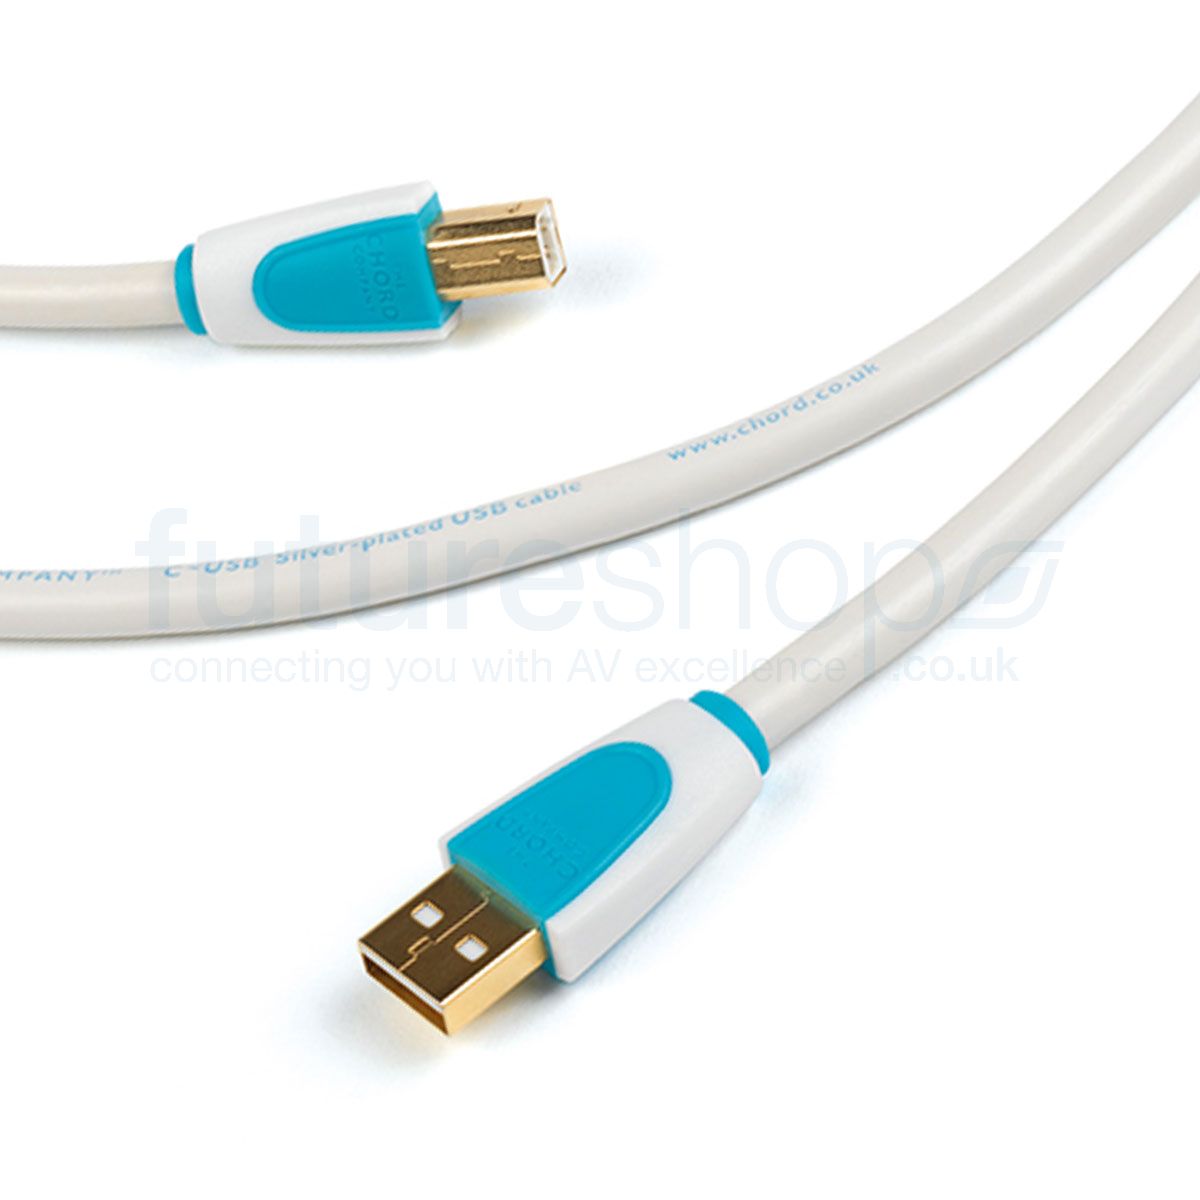 Chord C Usb High Performance Type A To Type B Cable Future Shop